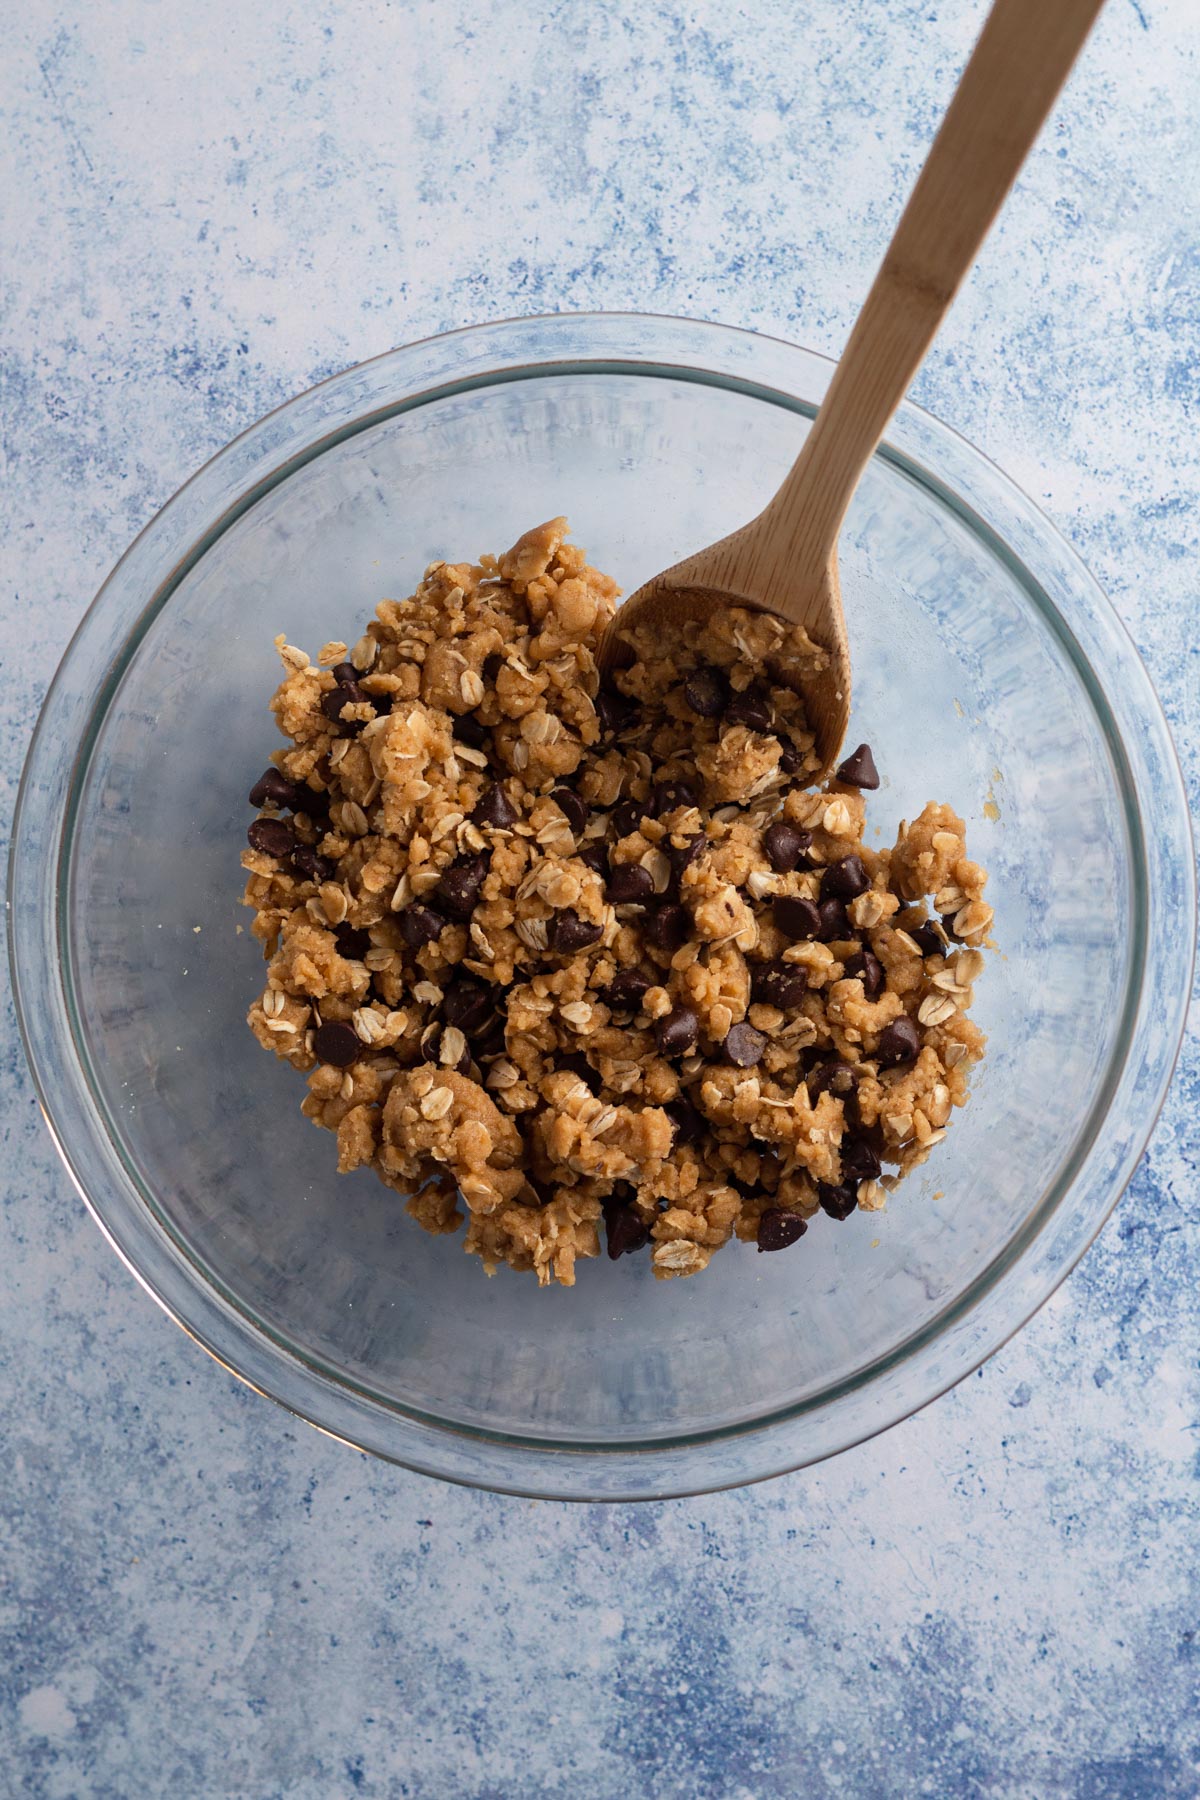 Cookie dough in a glass bowl with a wooden spoon on a blue background.